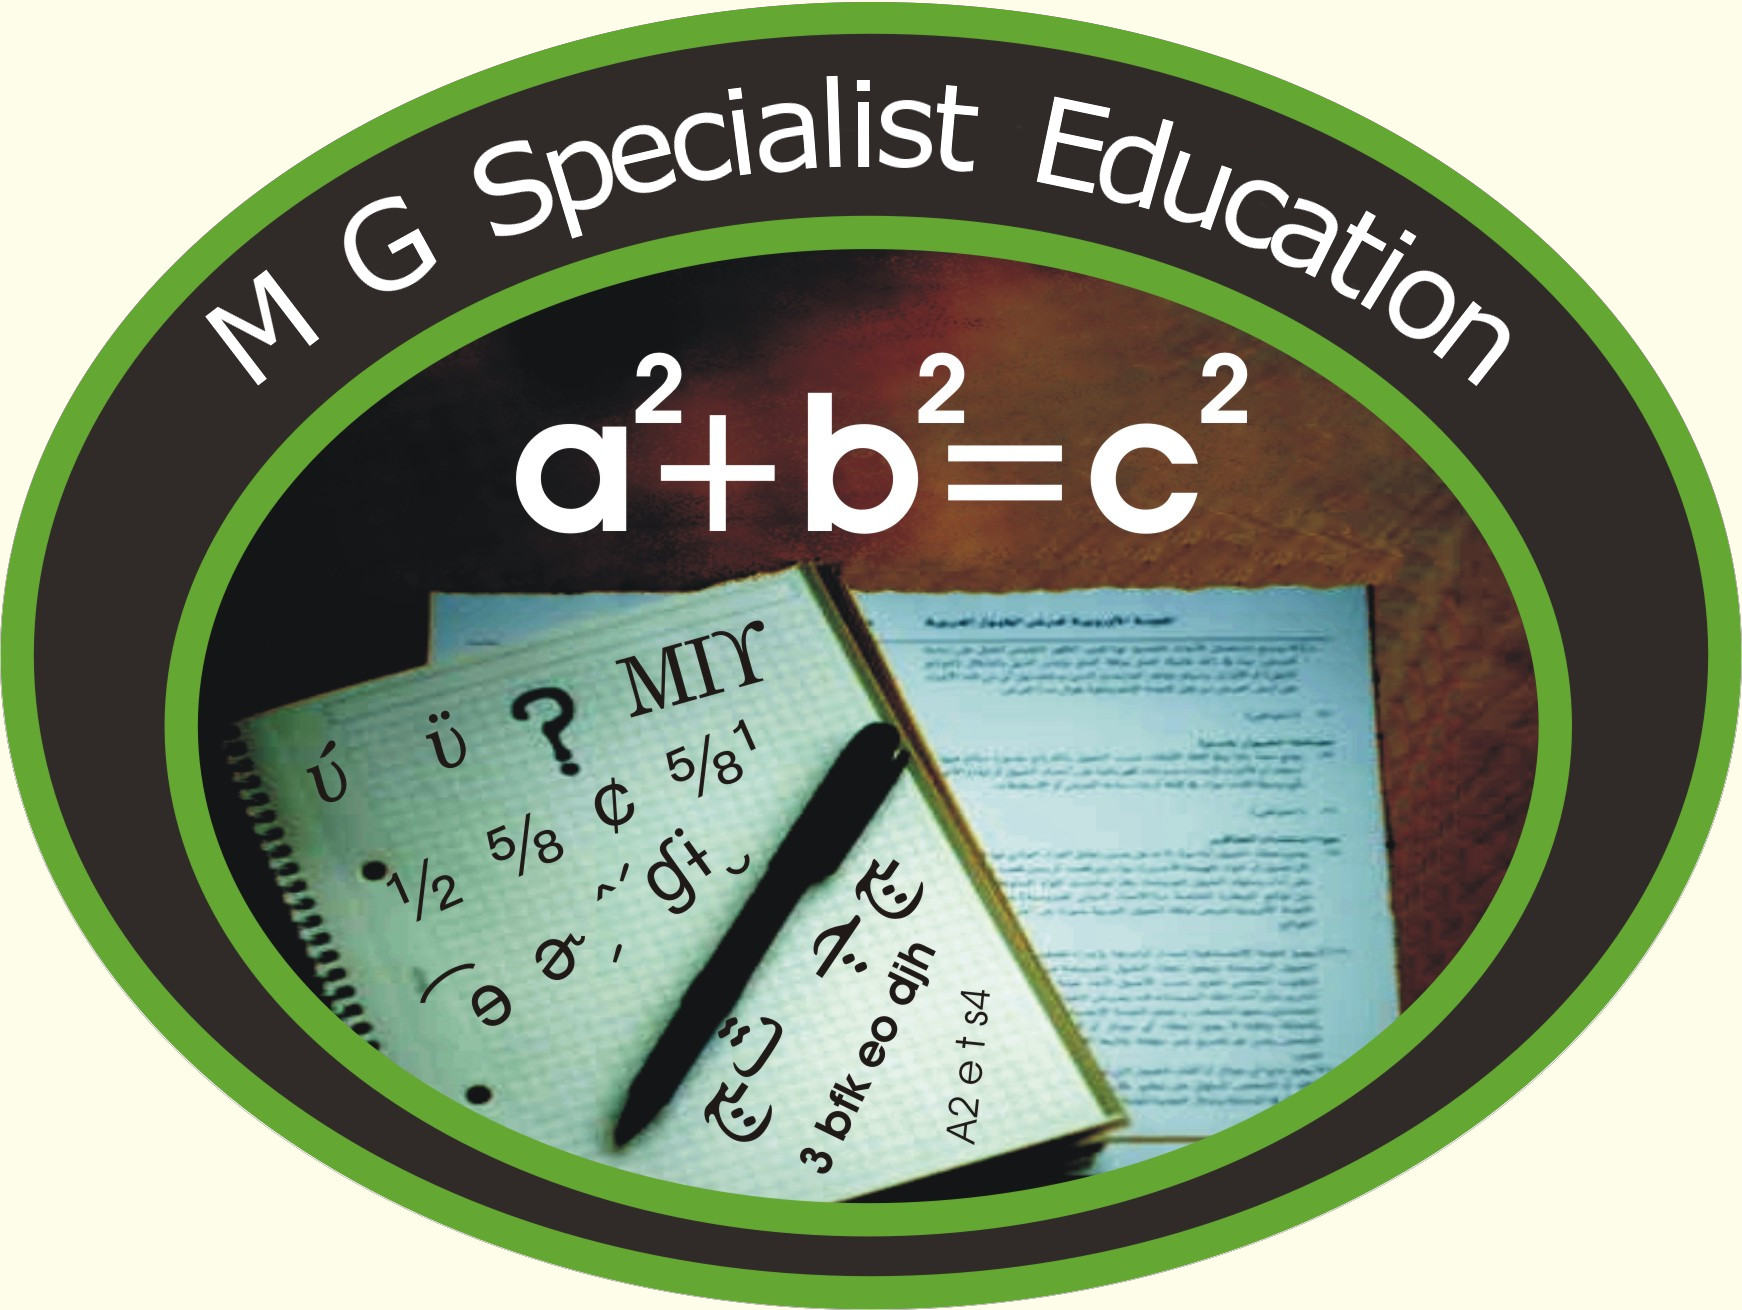  M G Specialist Education